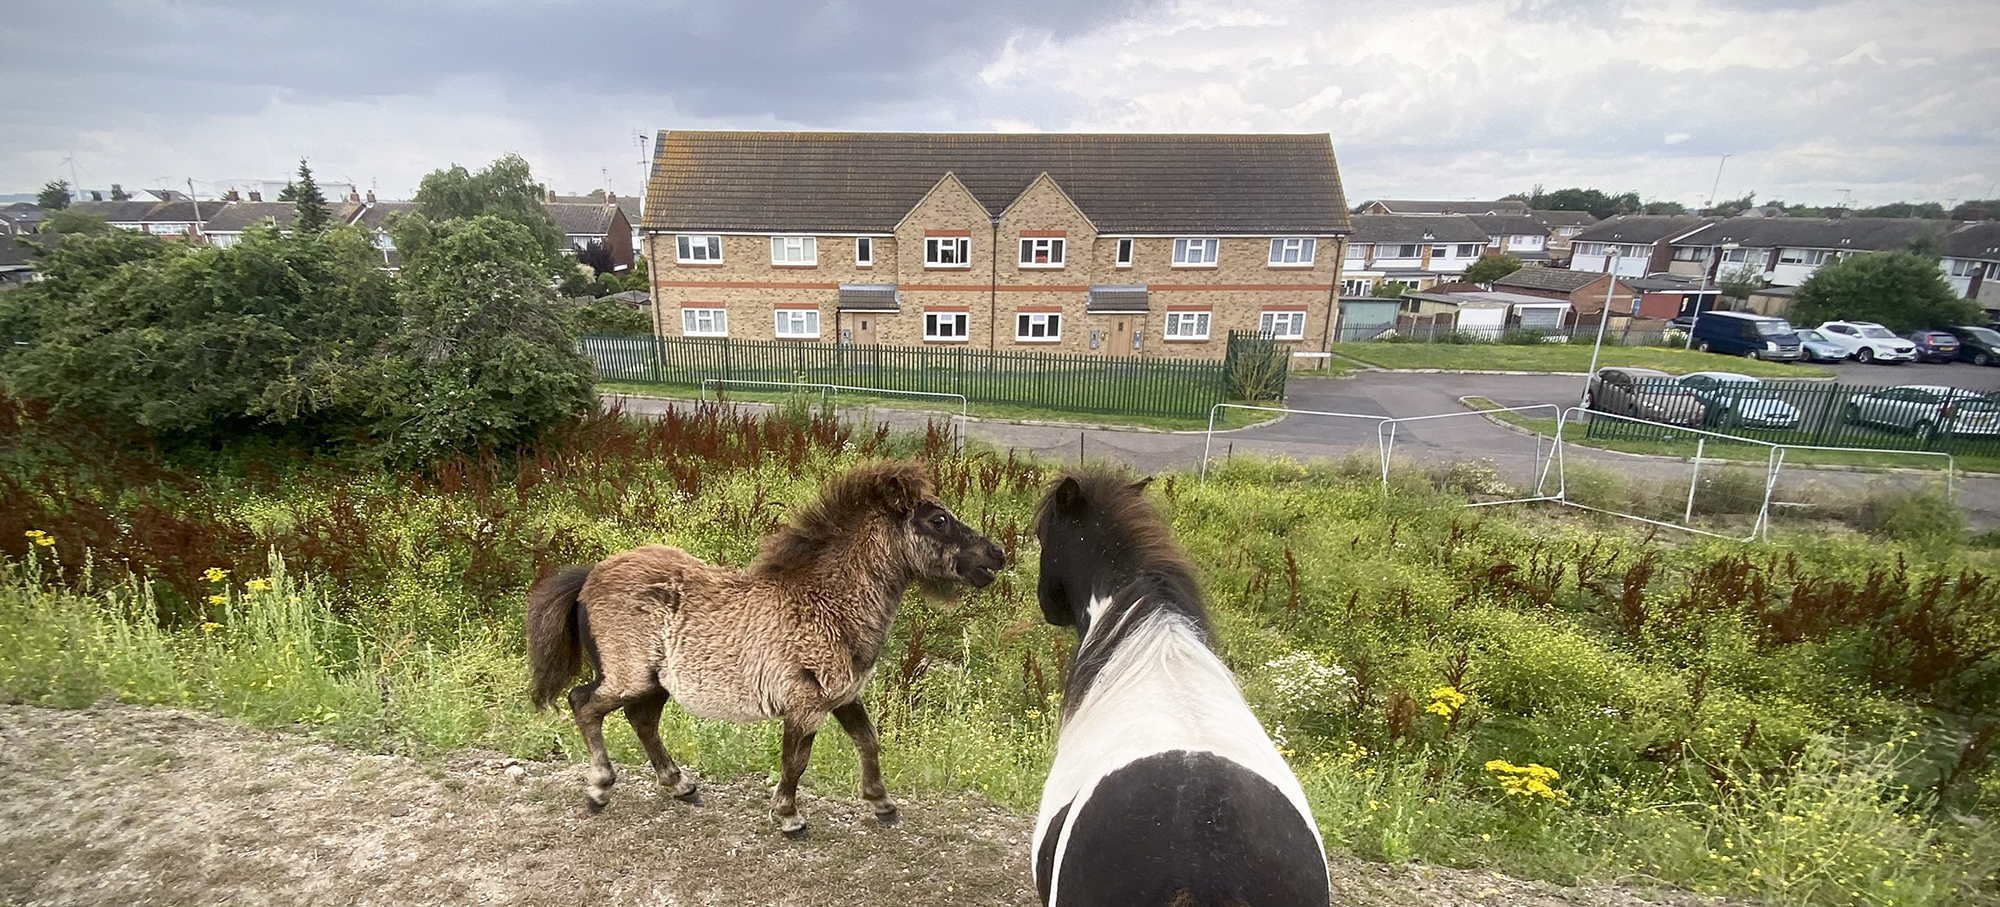 Horses on the edge of Tilbury credit Kevin Rushby 